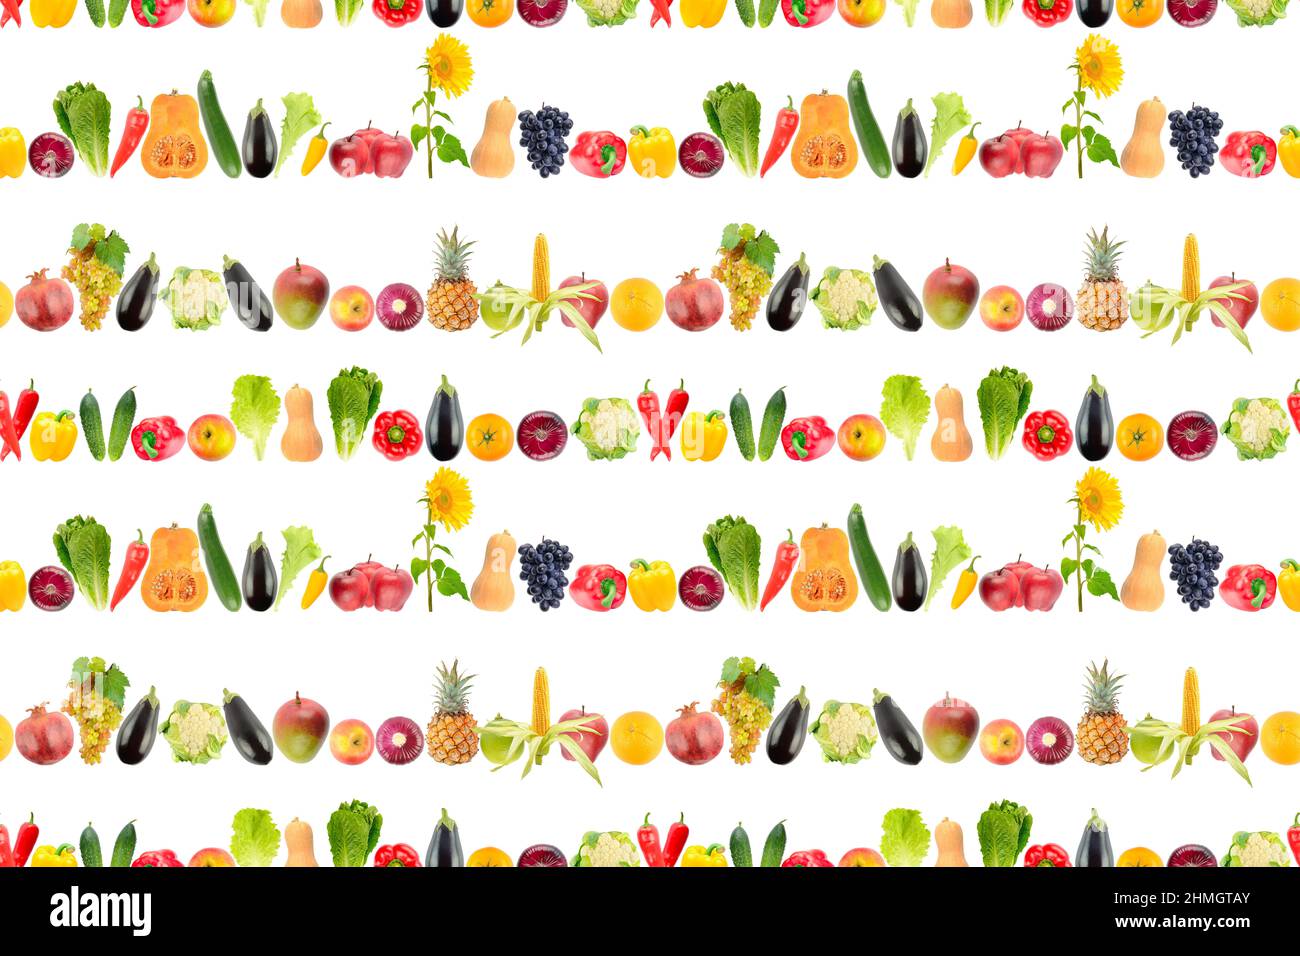 Seamless pattern of falling mixed fruits and vegetables isolated on white background. Stock Photo